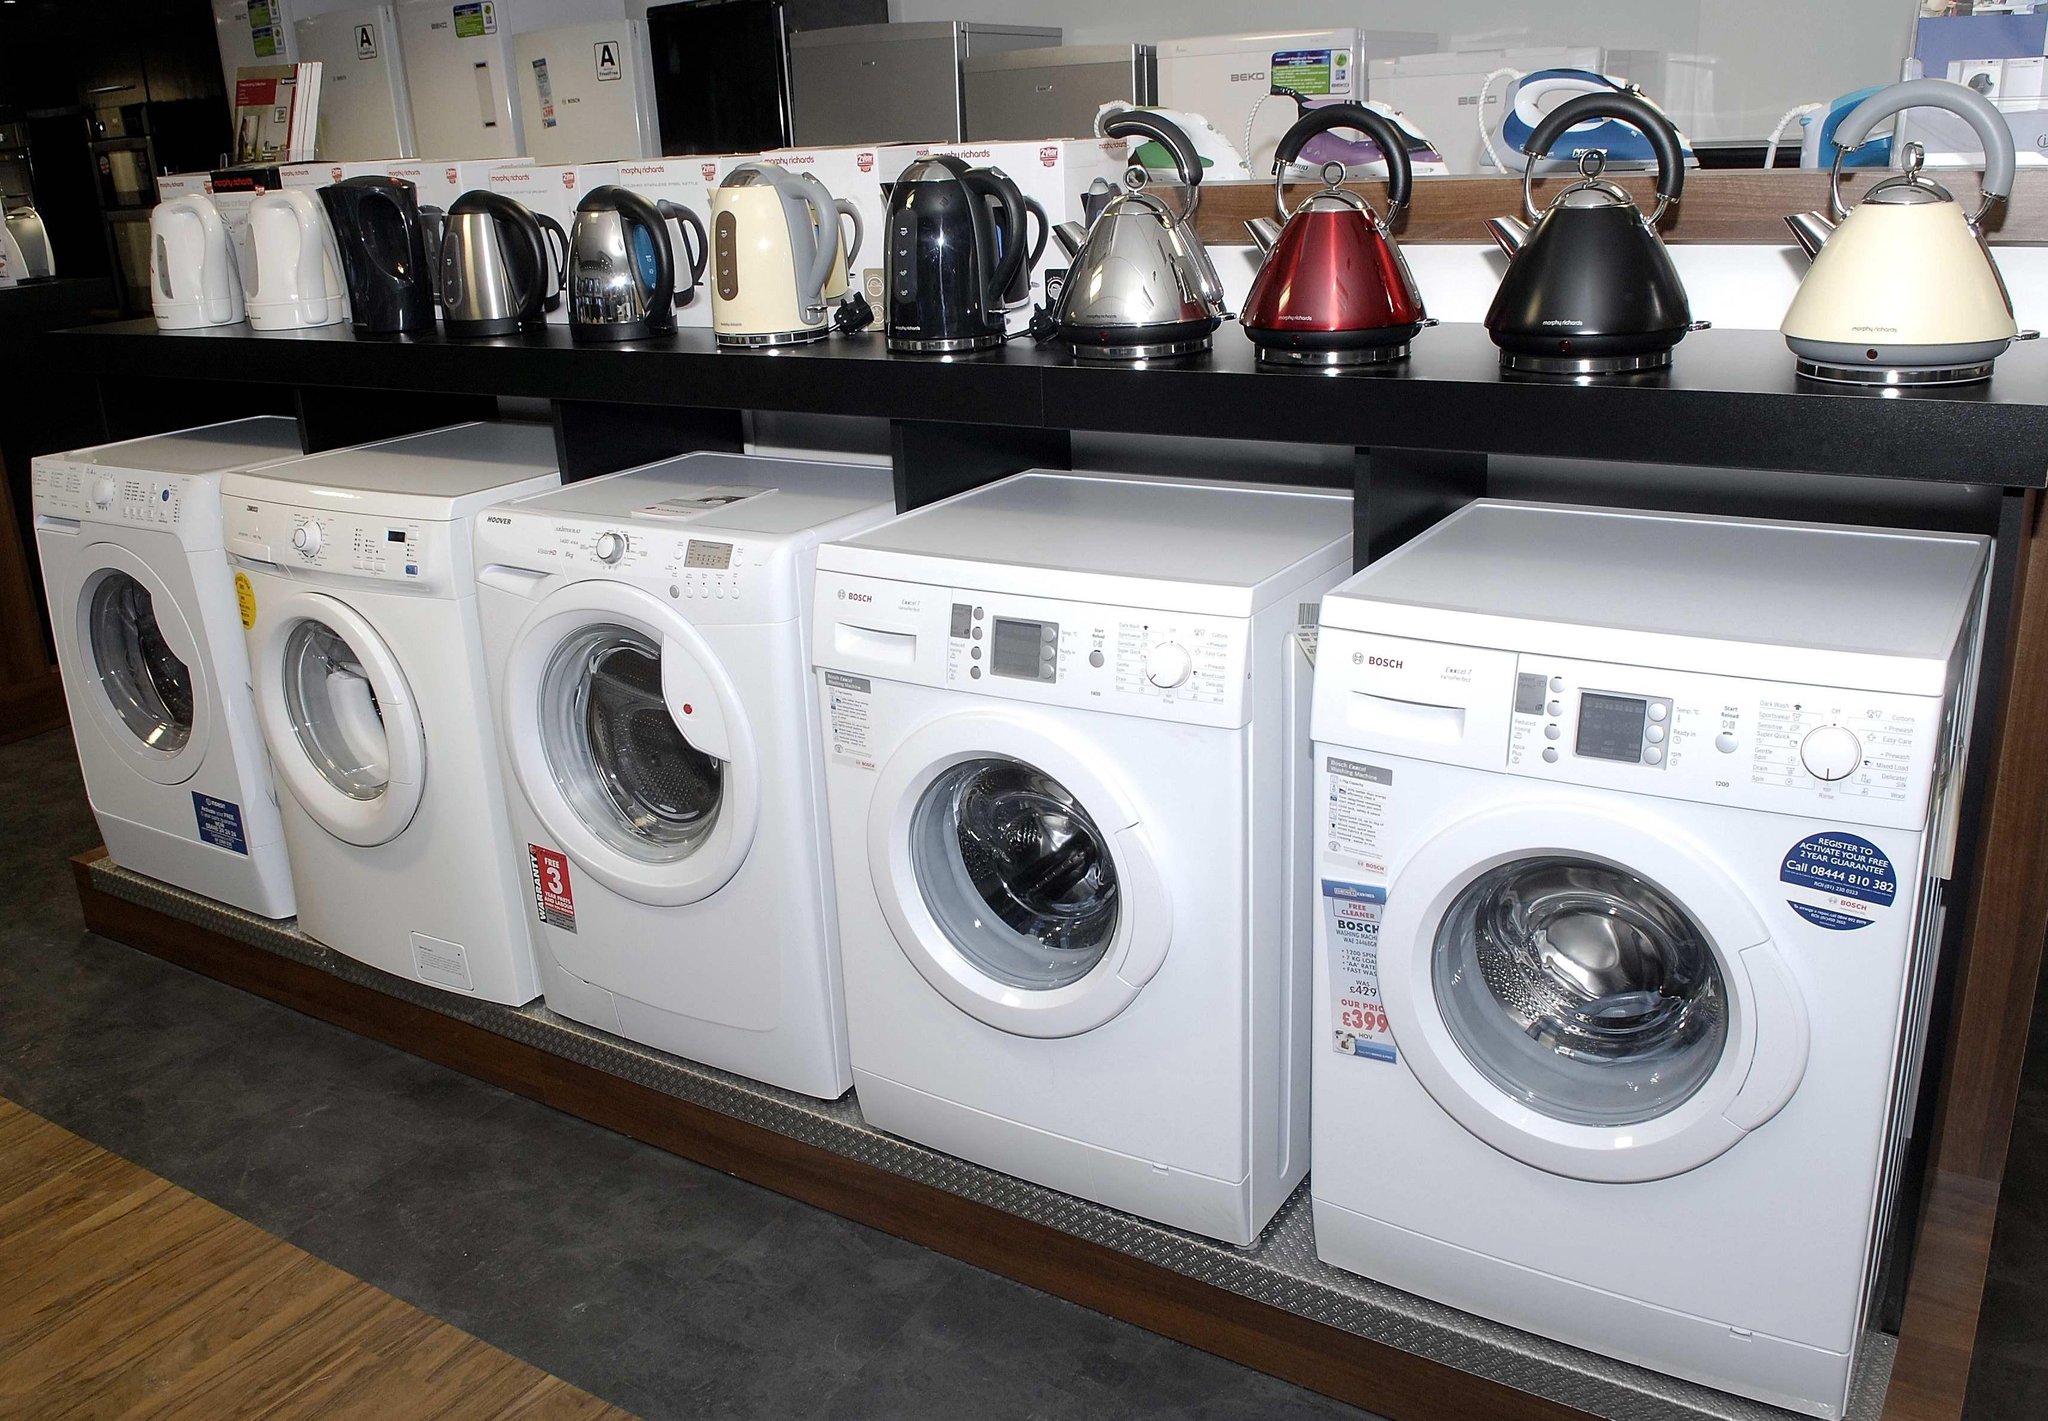 Surging price of electrical goods shocks shoppers